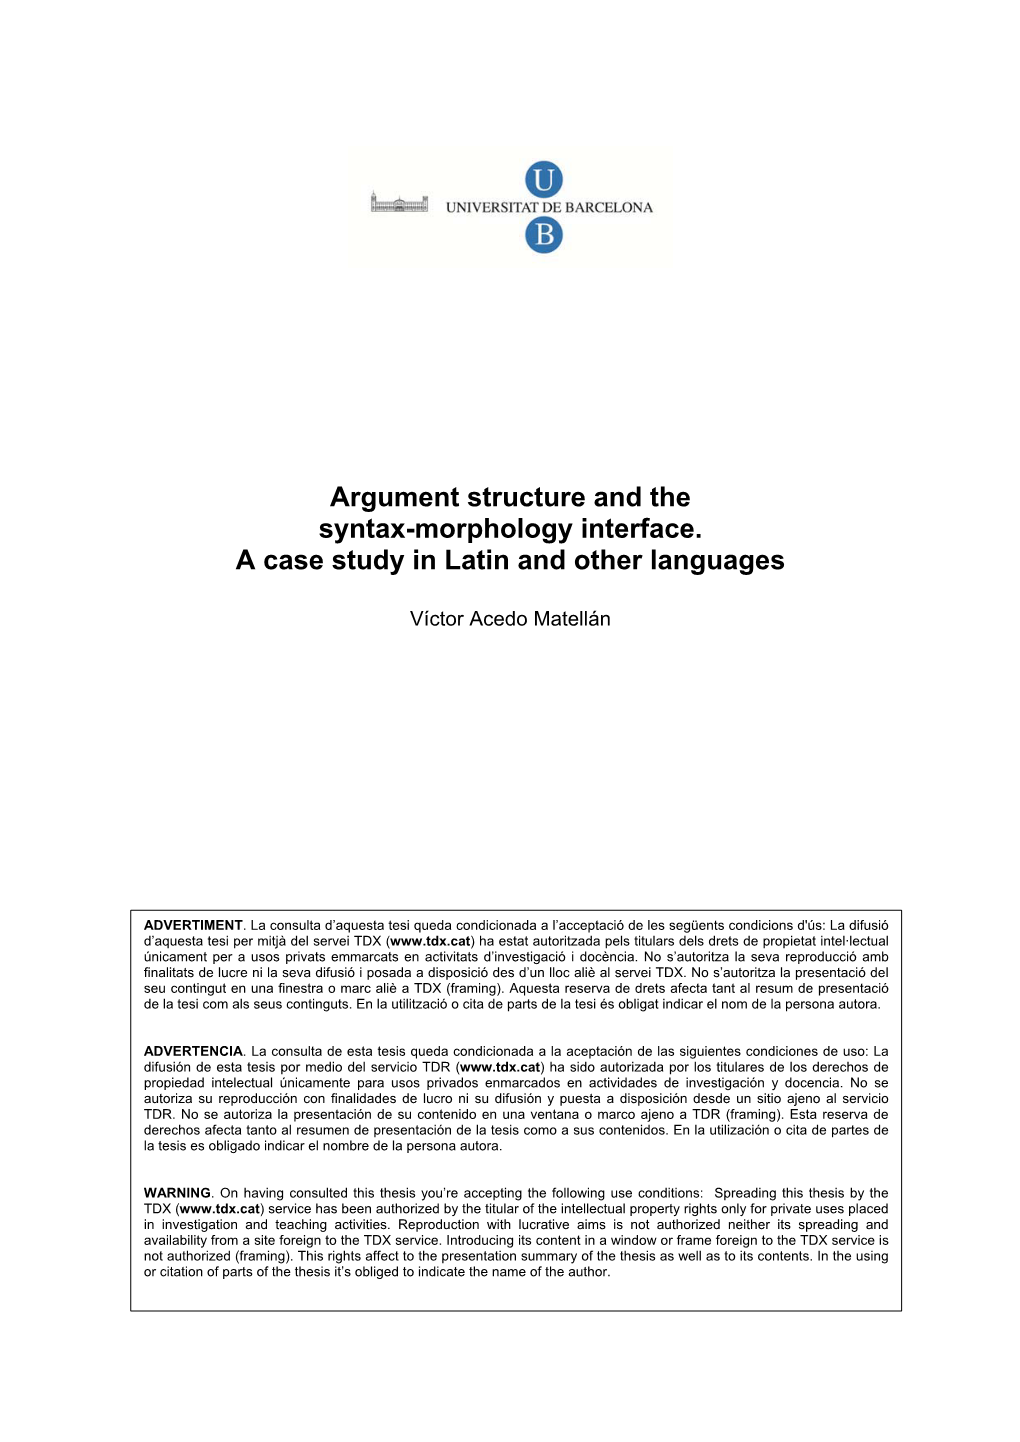 Argument Structure and the Syntax-Morphology Interface. a Case Study in Latin and Other Languages